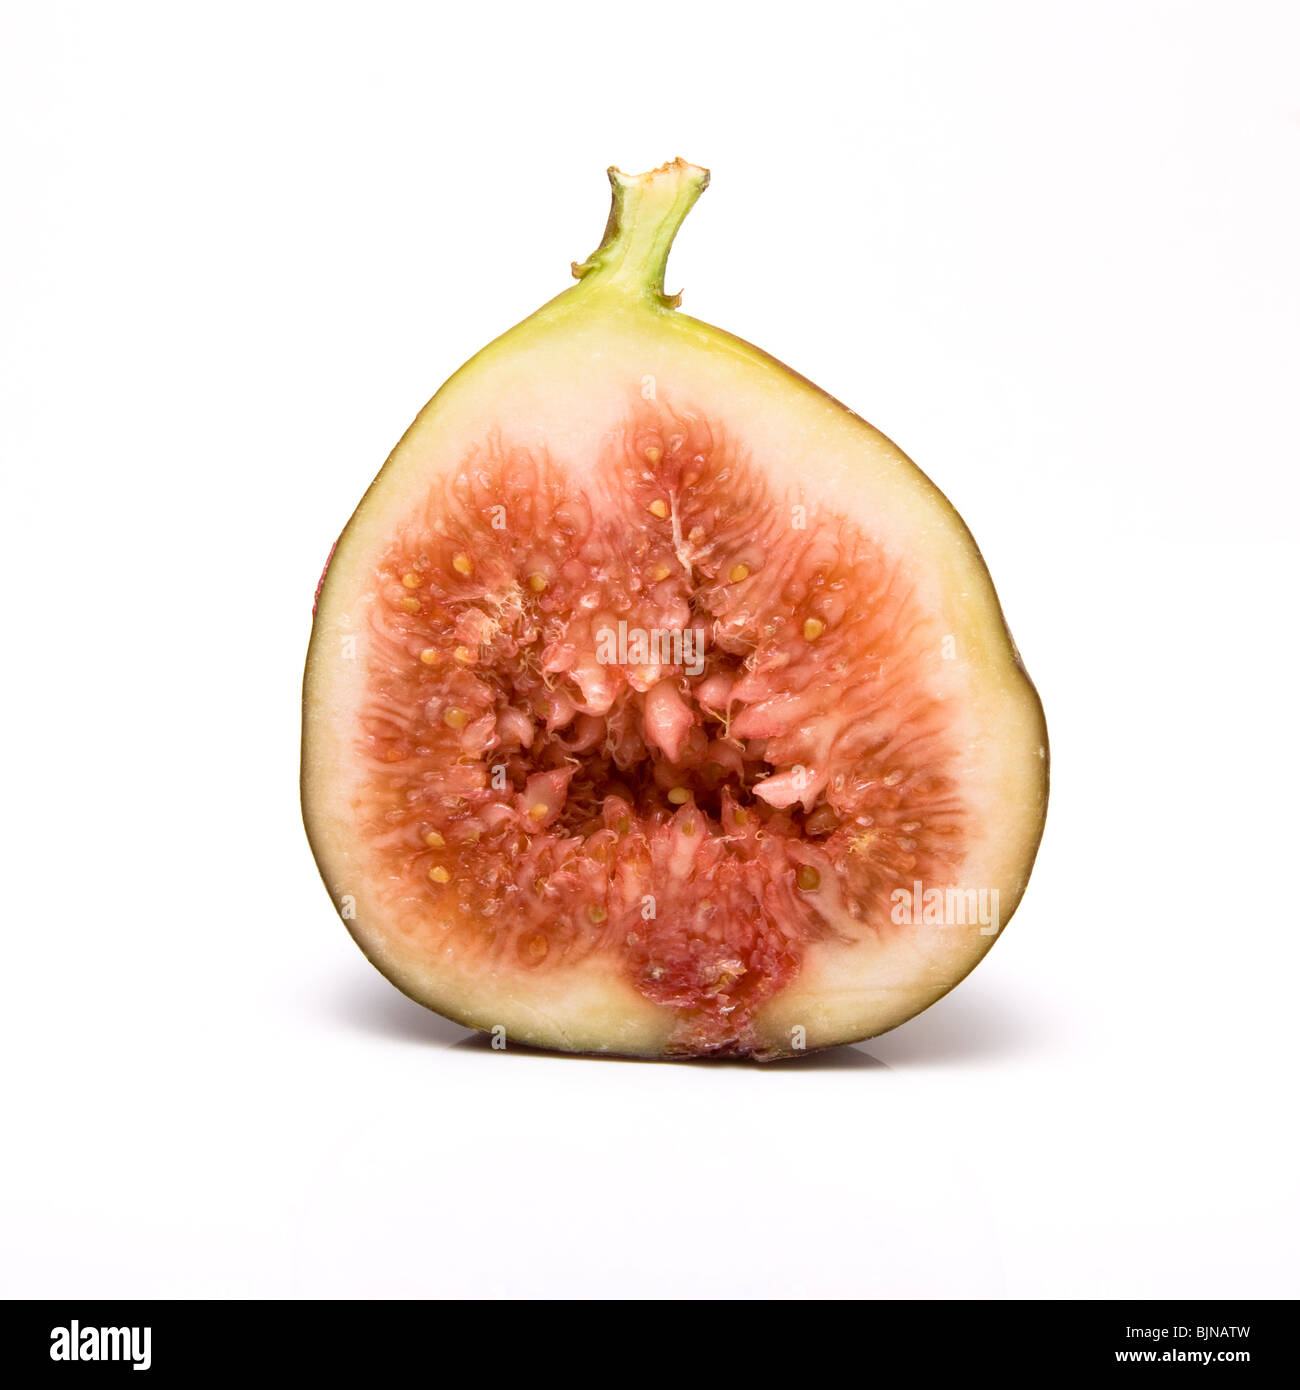 Sliced ripe fig from low viewpoint isolated against white background. Stock Photo